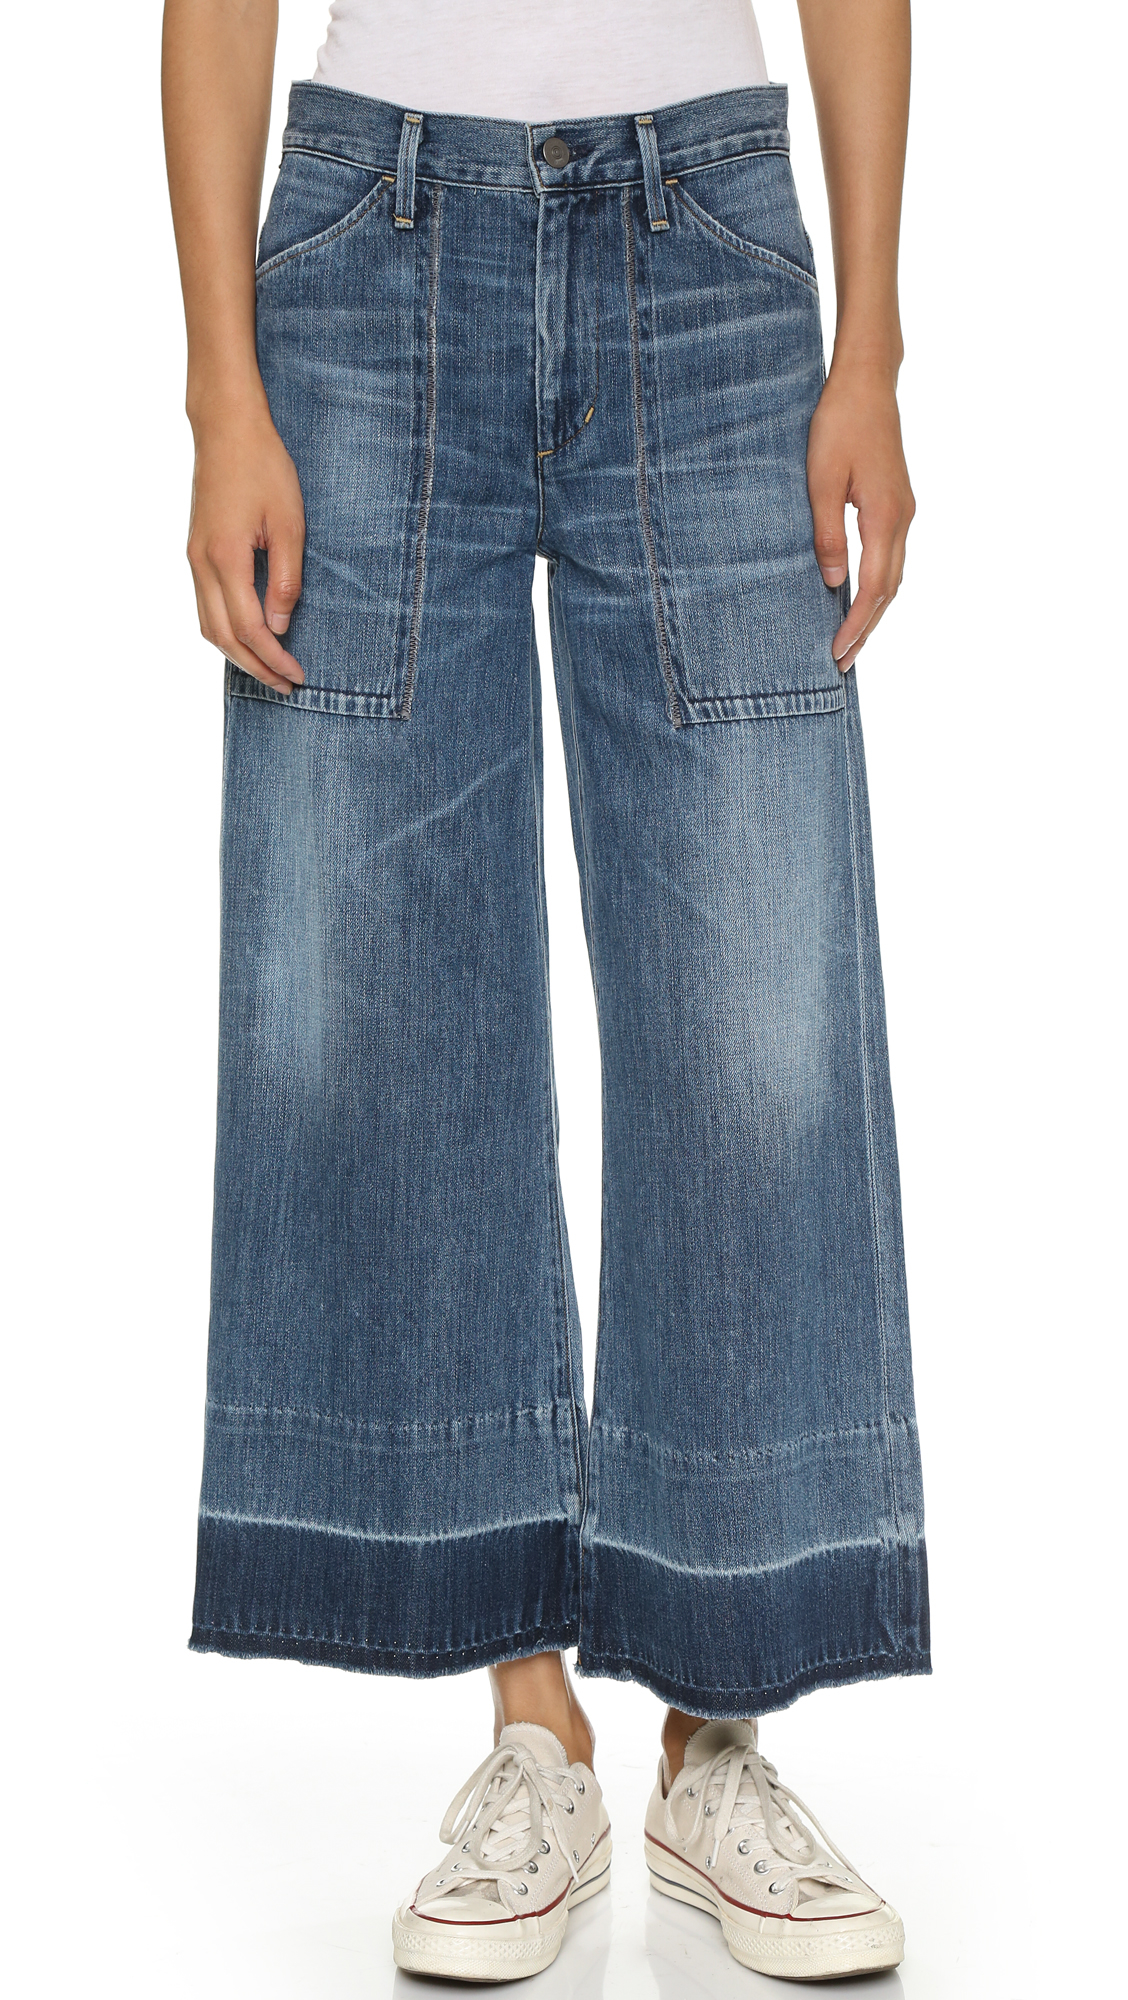 Lyst - Citizens Of Humanity Melanie Cropped Wide Leg Jeans in Blue